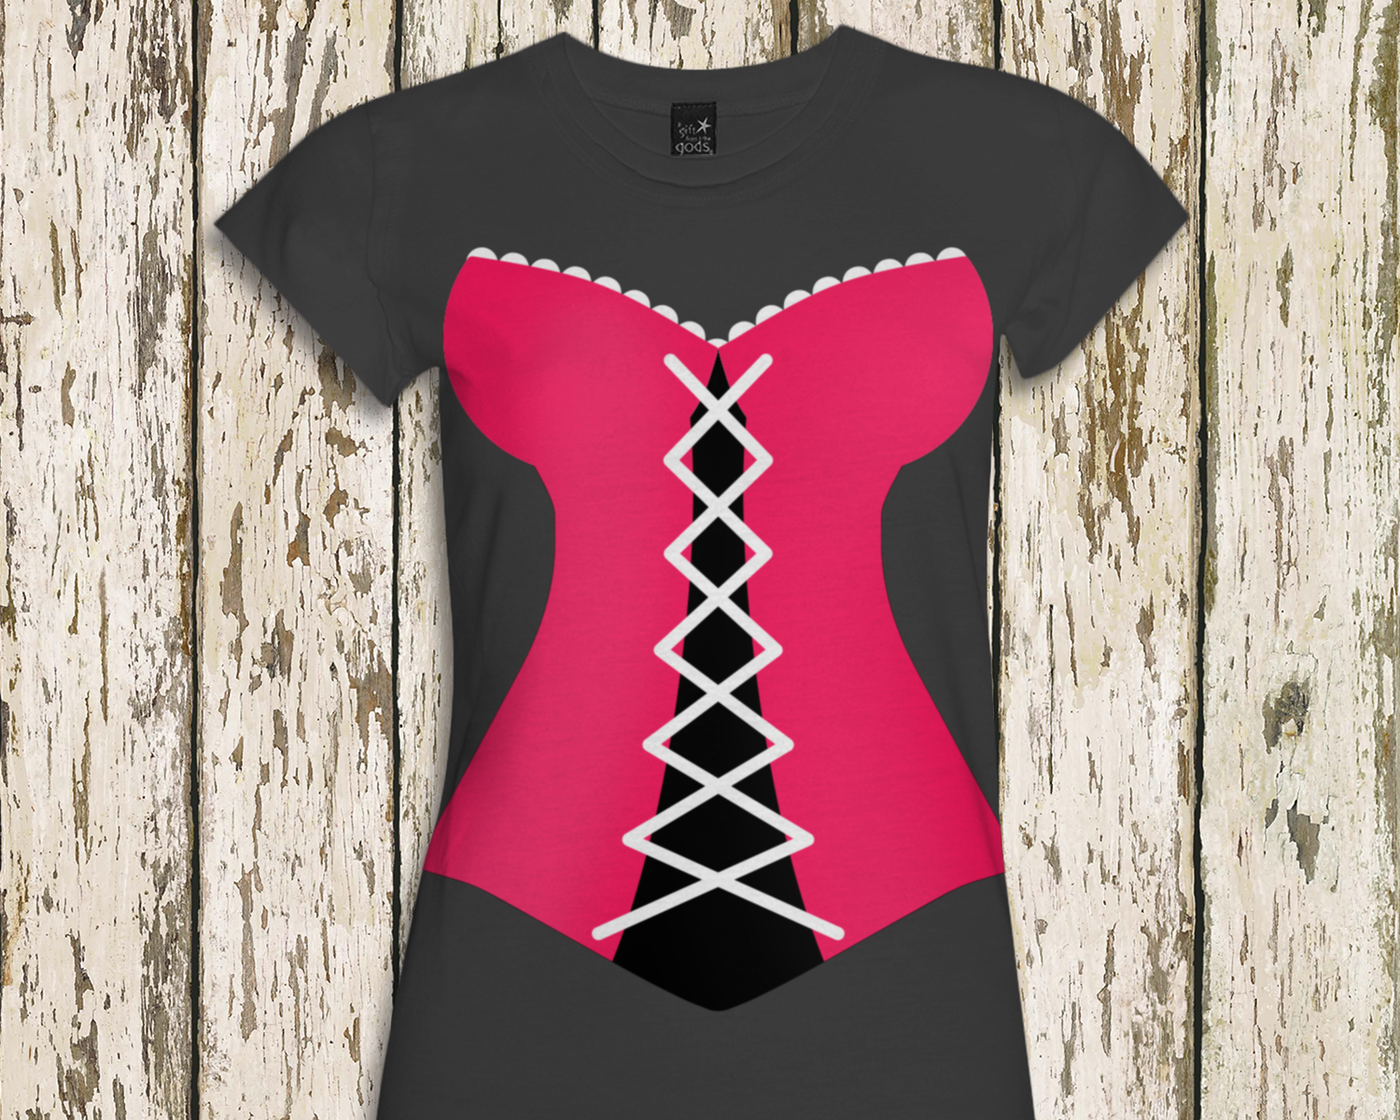 A shirt with the image of a hot pink corset with white strings and lace.